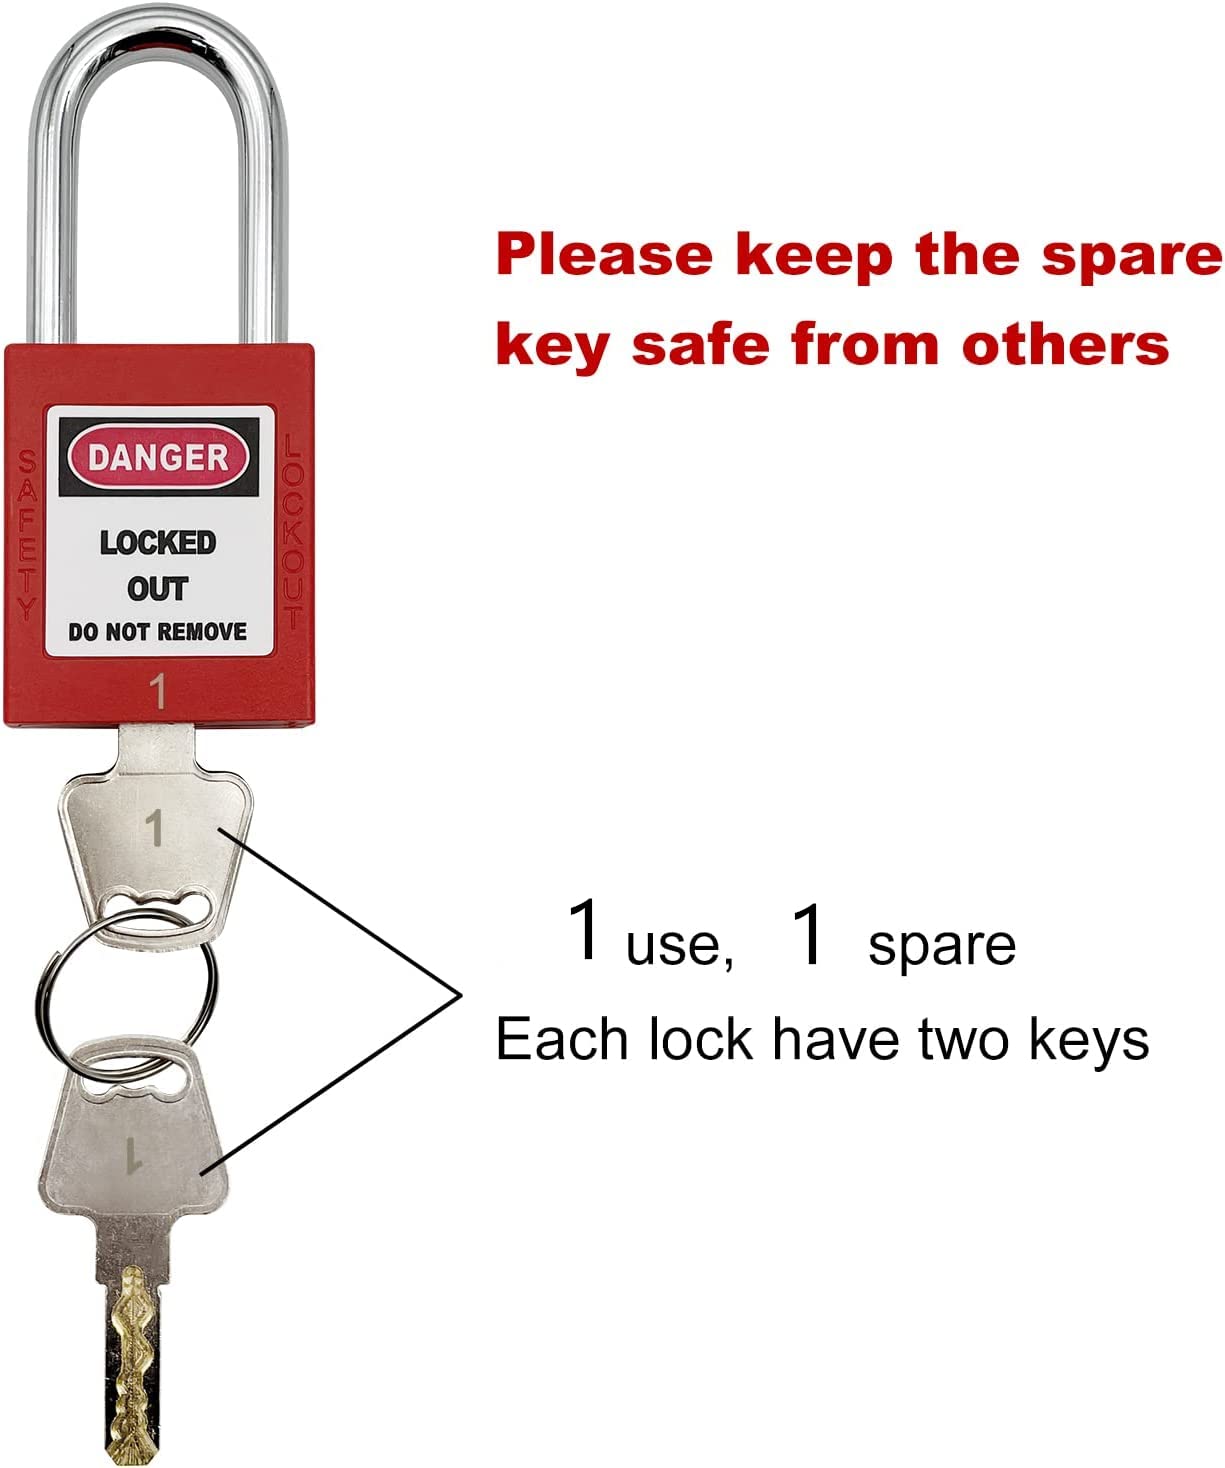 Lockout Tagout Locks, Safety Padlocks, Loto Locks Keyed Differently Lock Out Tag Out Device Plastic